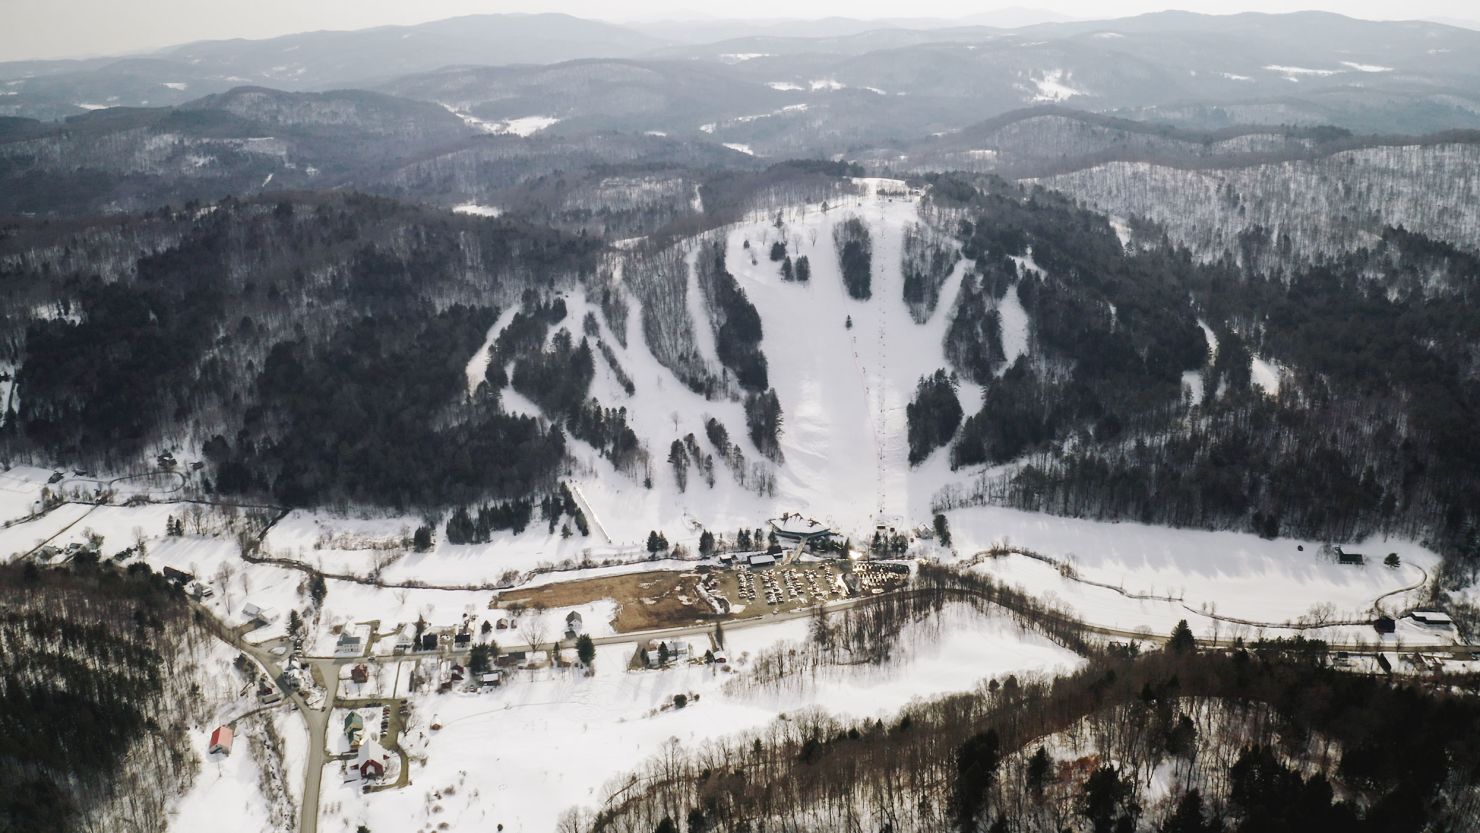 A popular Vermont ski resort originally known as Suicide Six has announced that it will change its "insensitive" name in the weeks to come.
The resort shared the news in a post on its website on June 28.